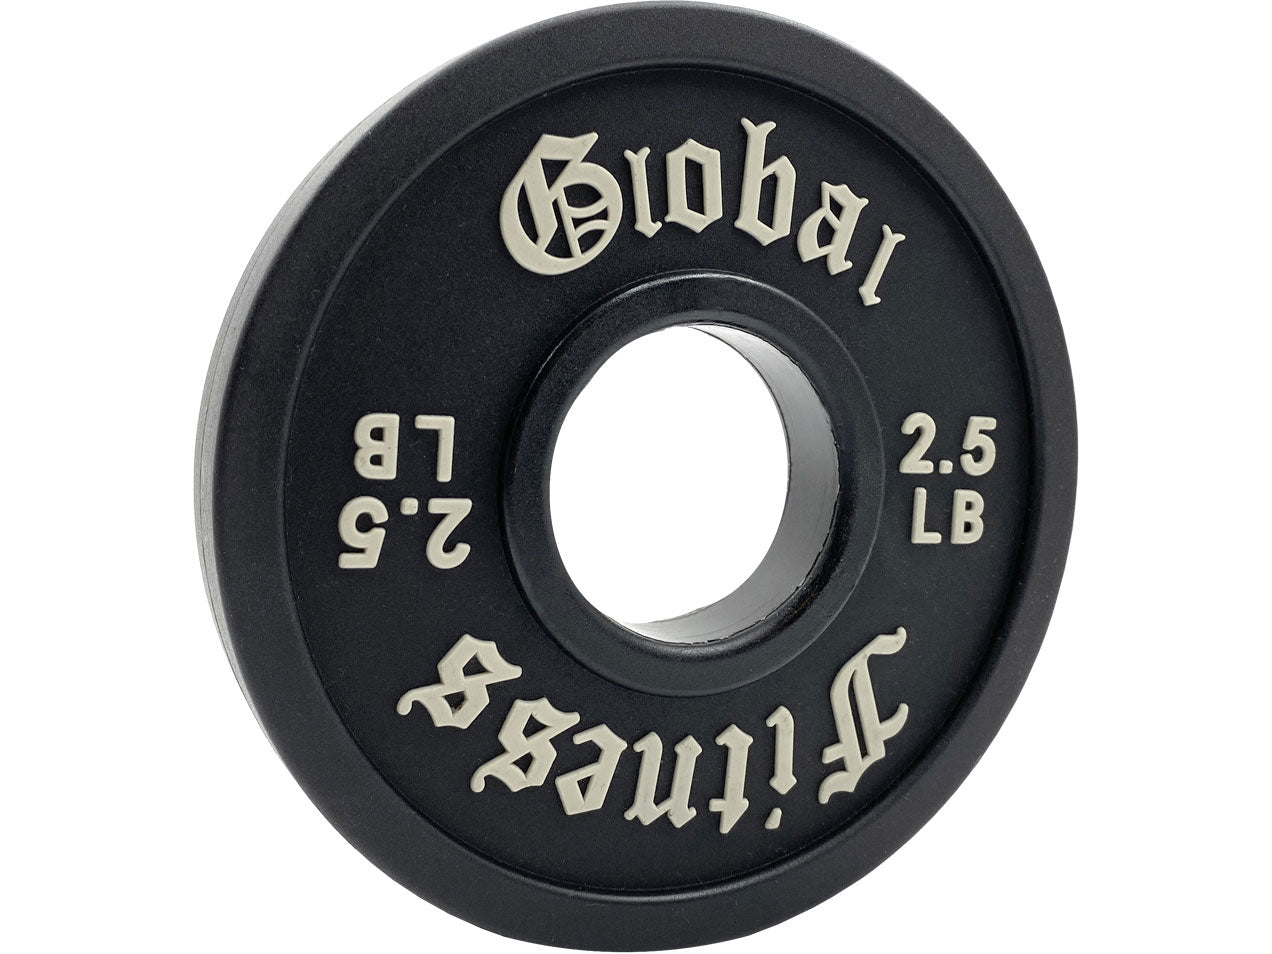 Global Fitness Pro-Style Urethane Olympic 2.5LB Plate Angle